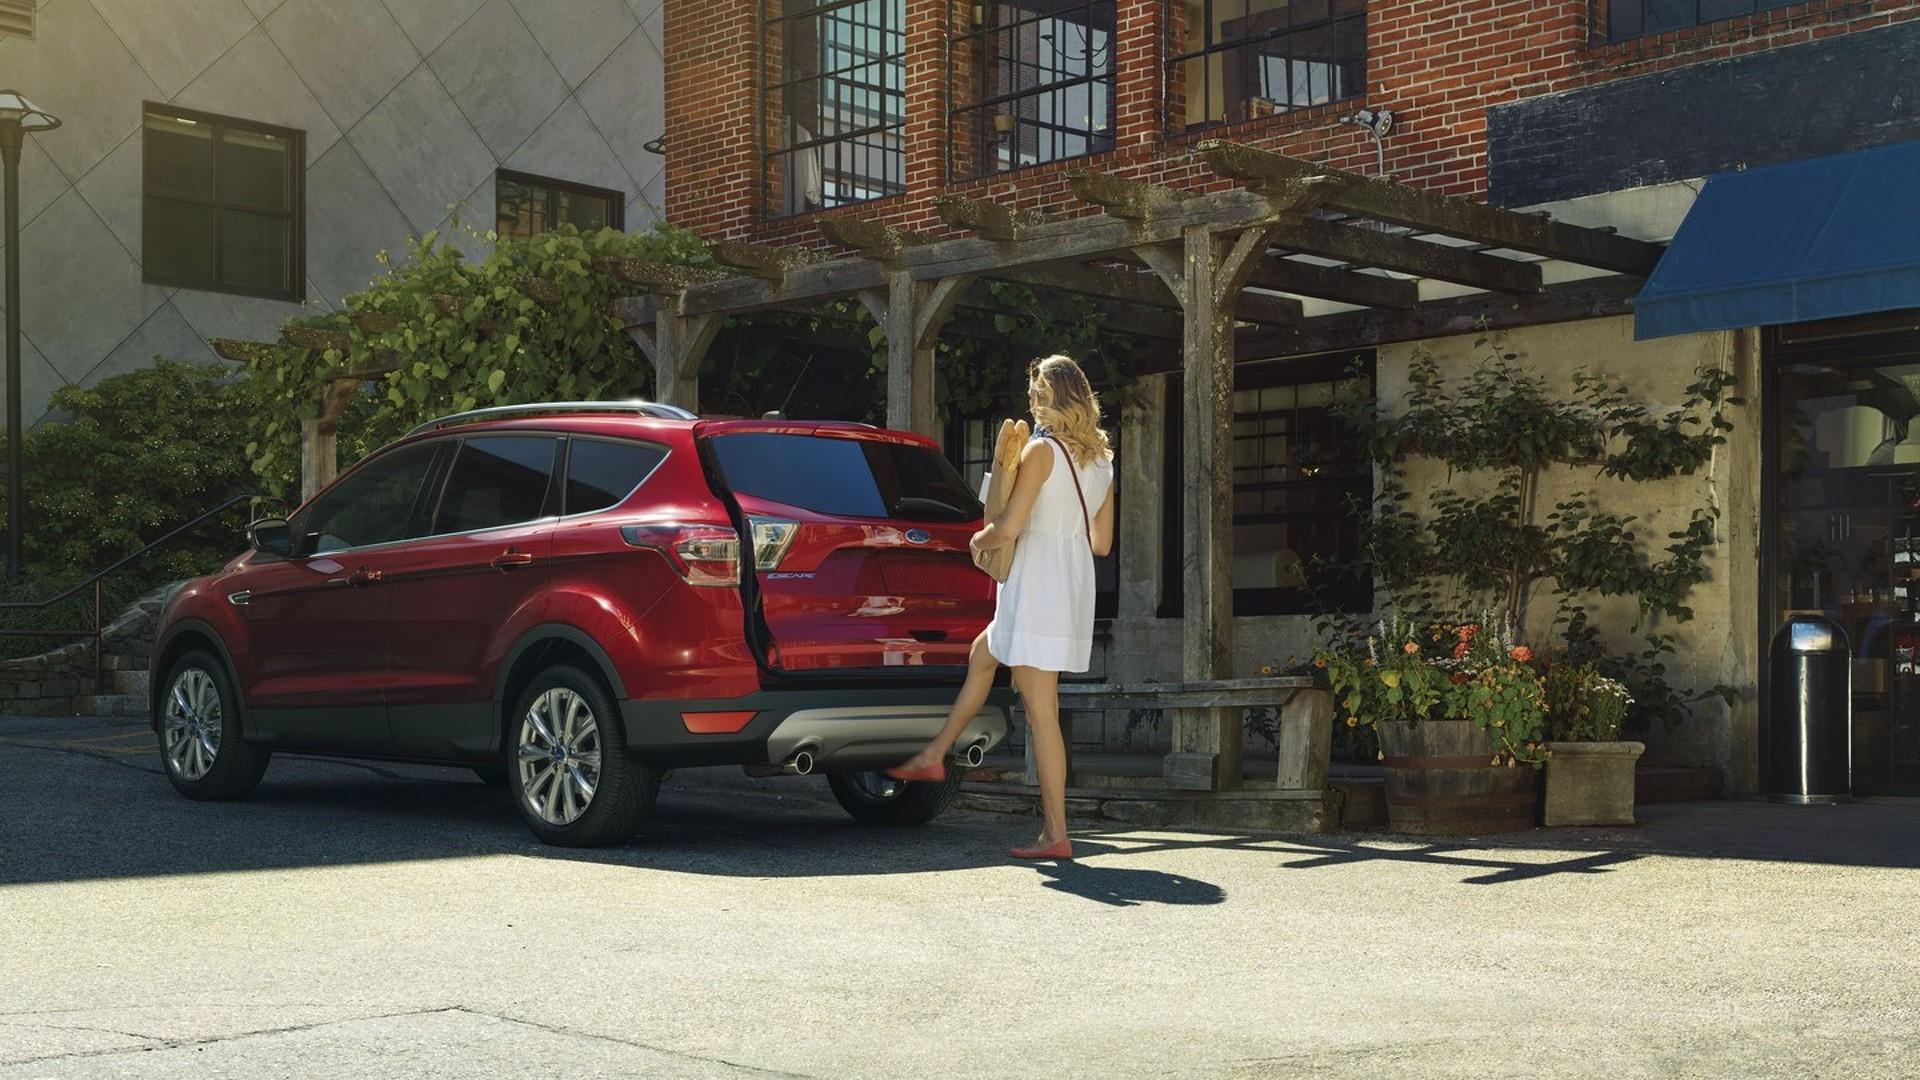 Ford Escape Wallpaper HD Photo, Wallpaper and other Image